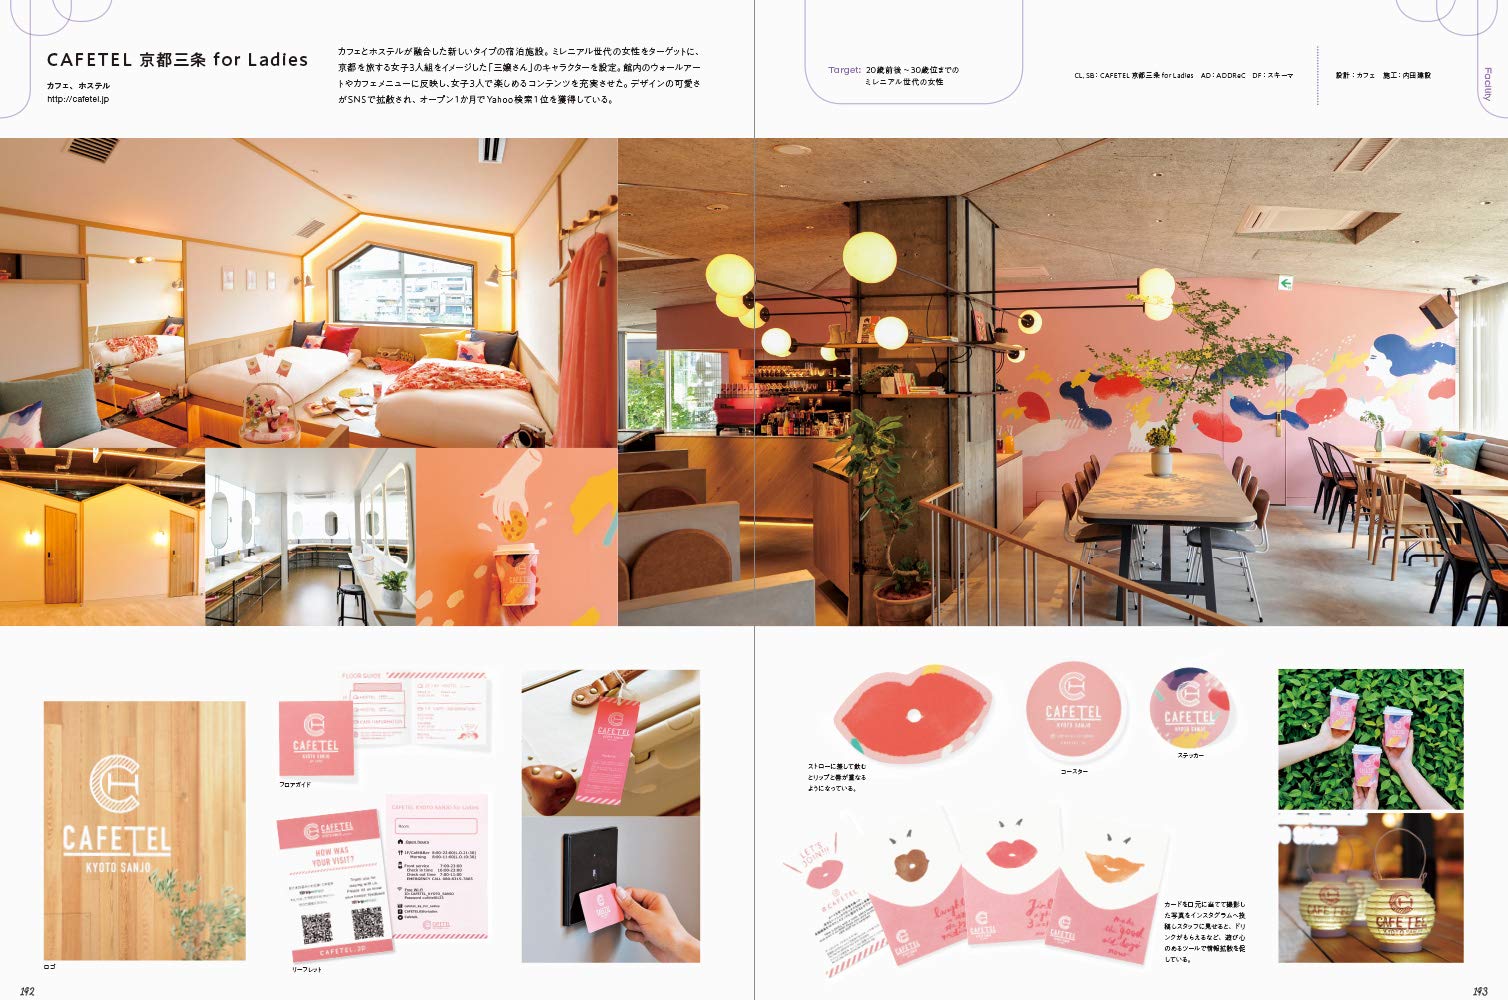 Graphics from shops for women - Japanese graphic design